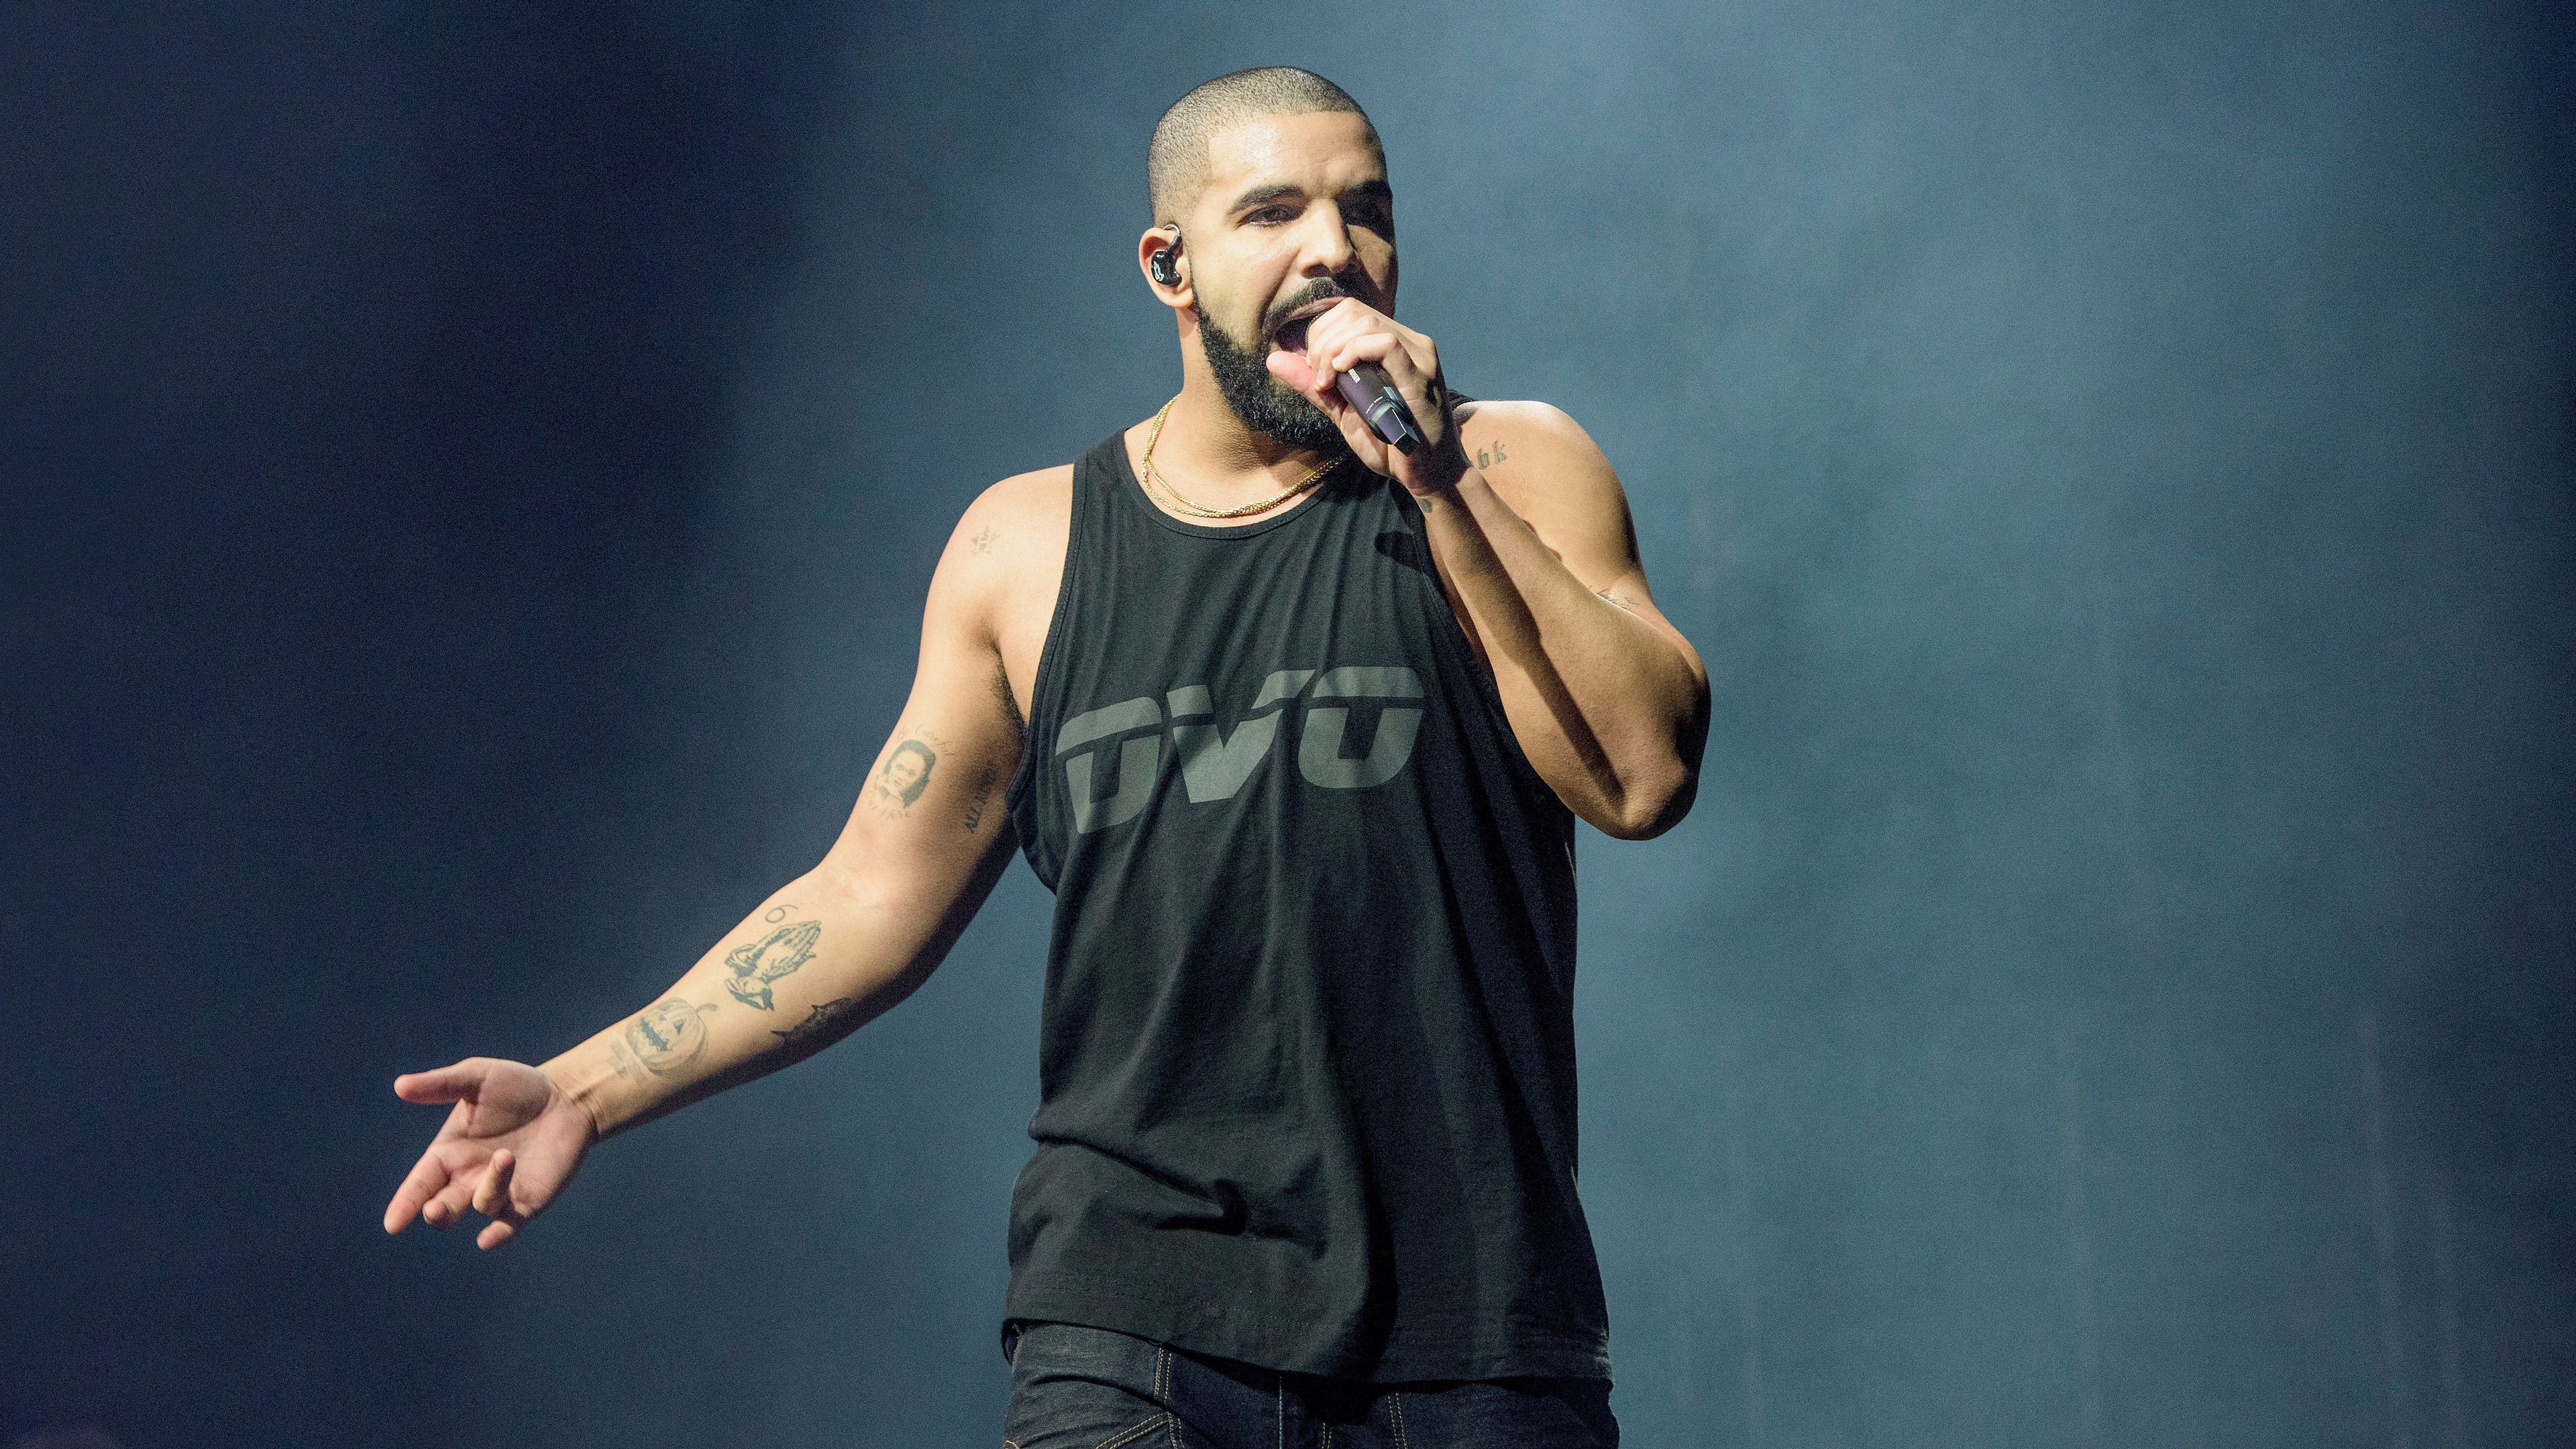 A man in black shirt and tank top is holding up his microphone - Drake